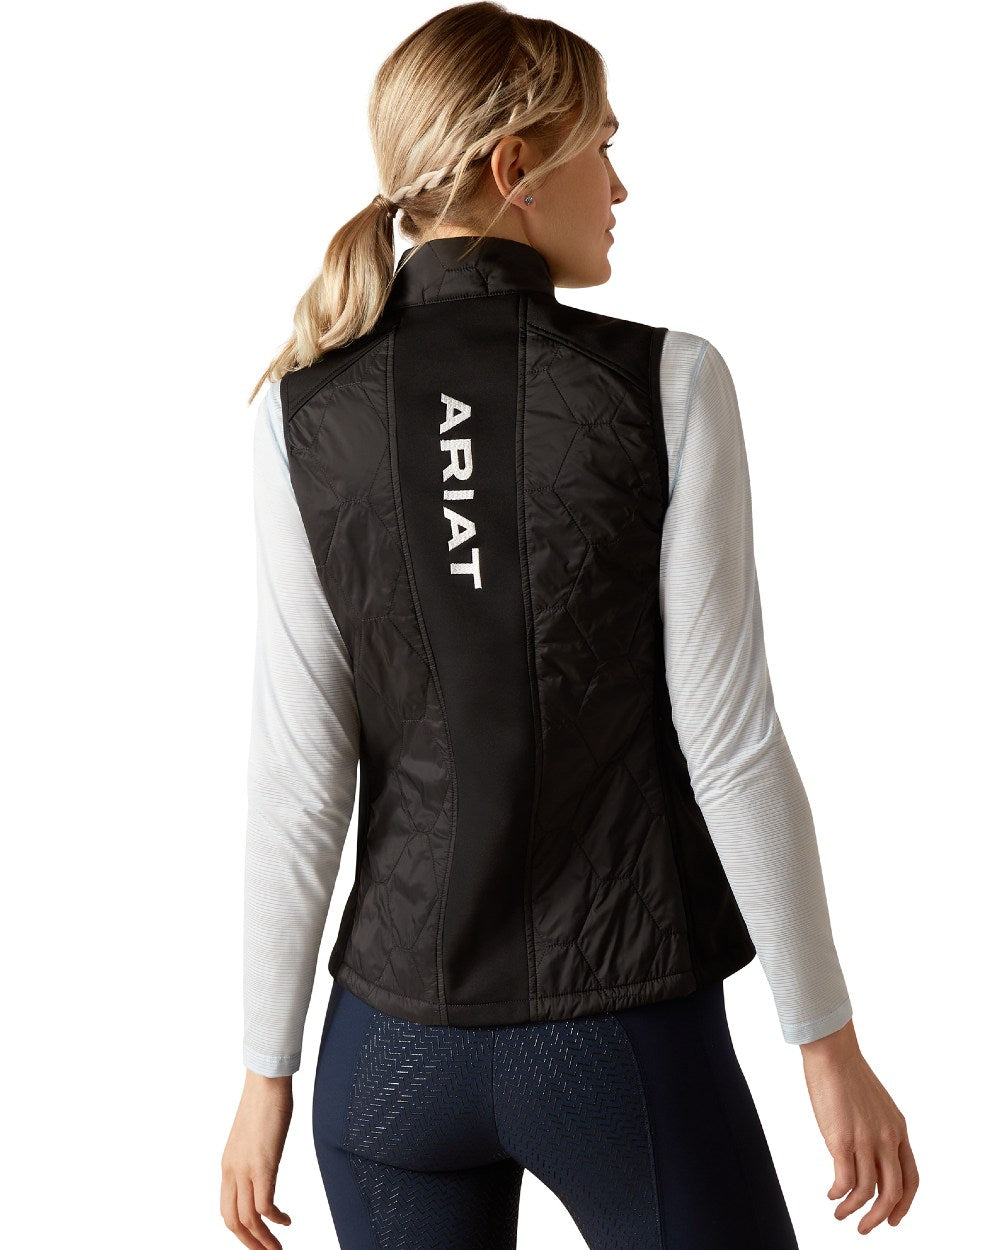 Black Coloured Ariat Womens Fusion Insulated Vest On A White Background 